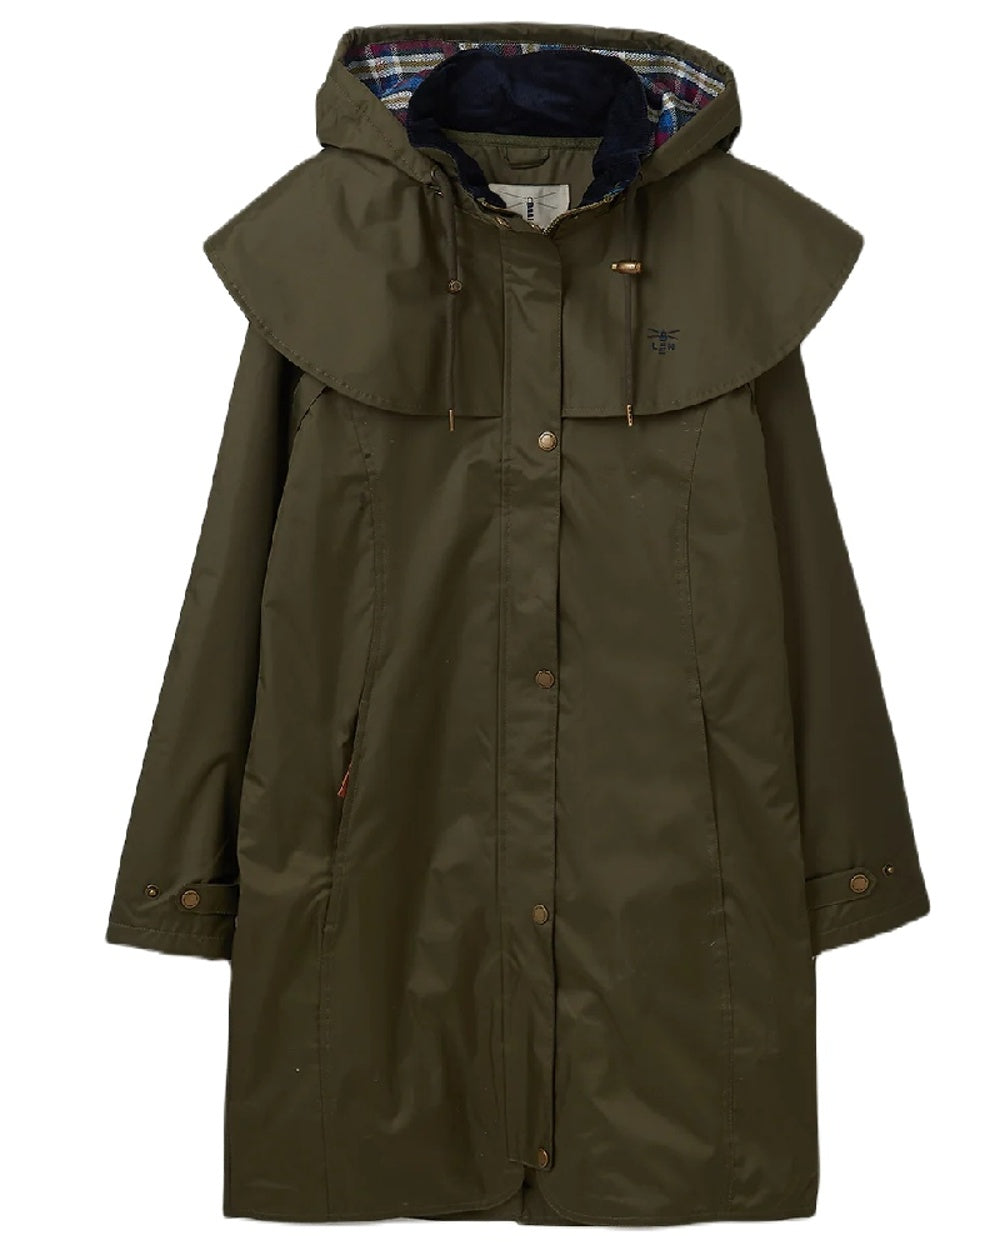 Fern coloured Lighthouse Outrider 3/4 Length Ladies Waterproof Raincoat on White background 